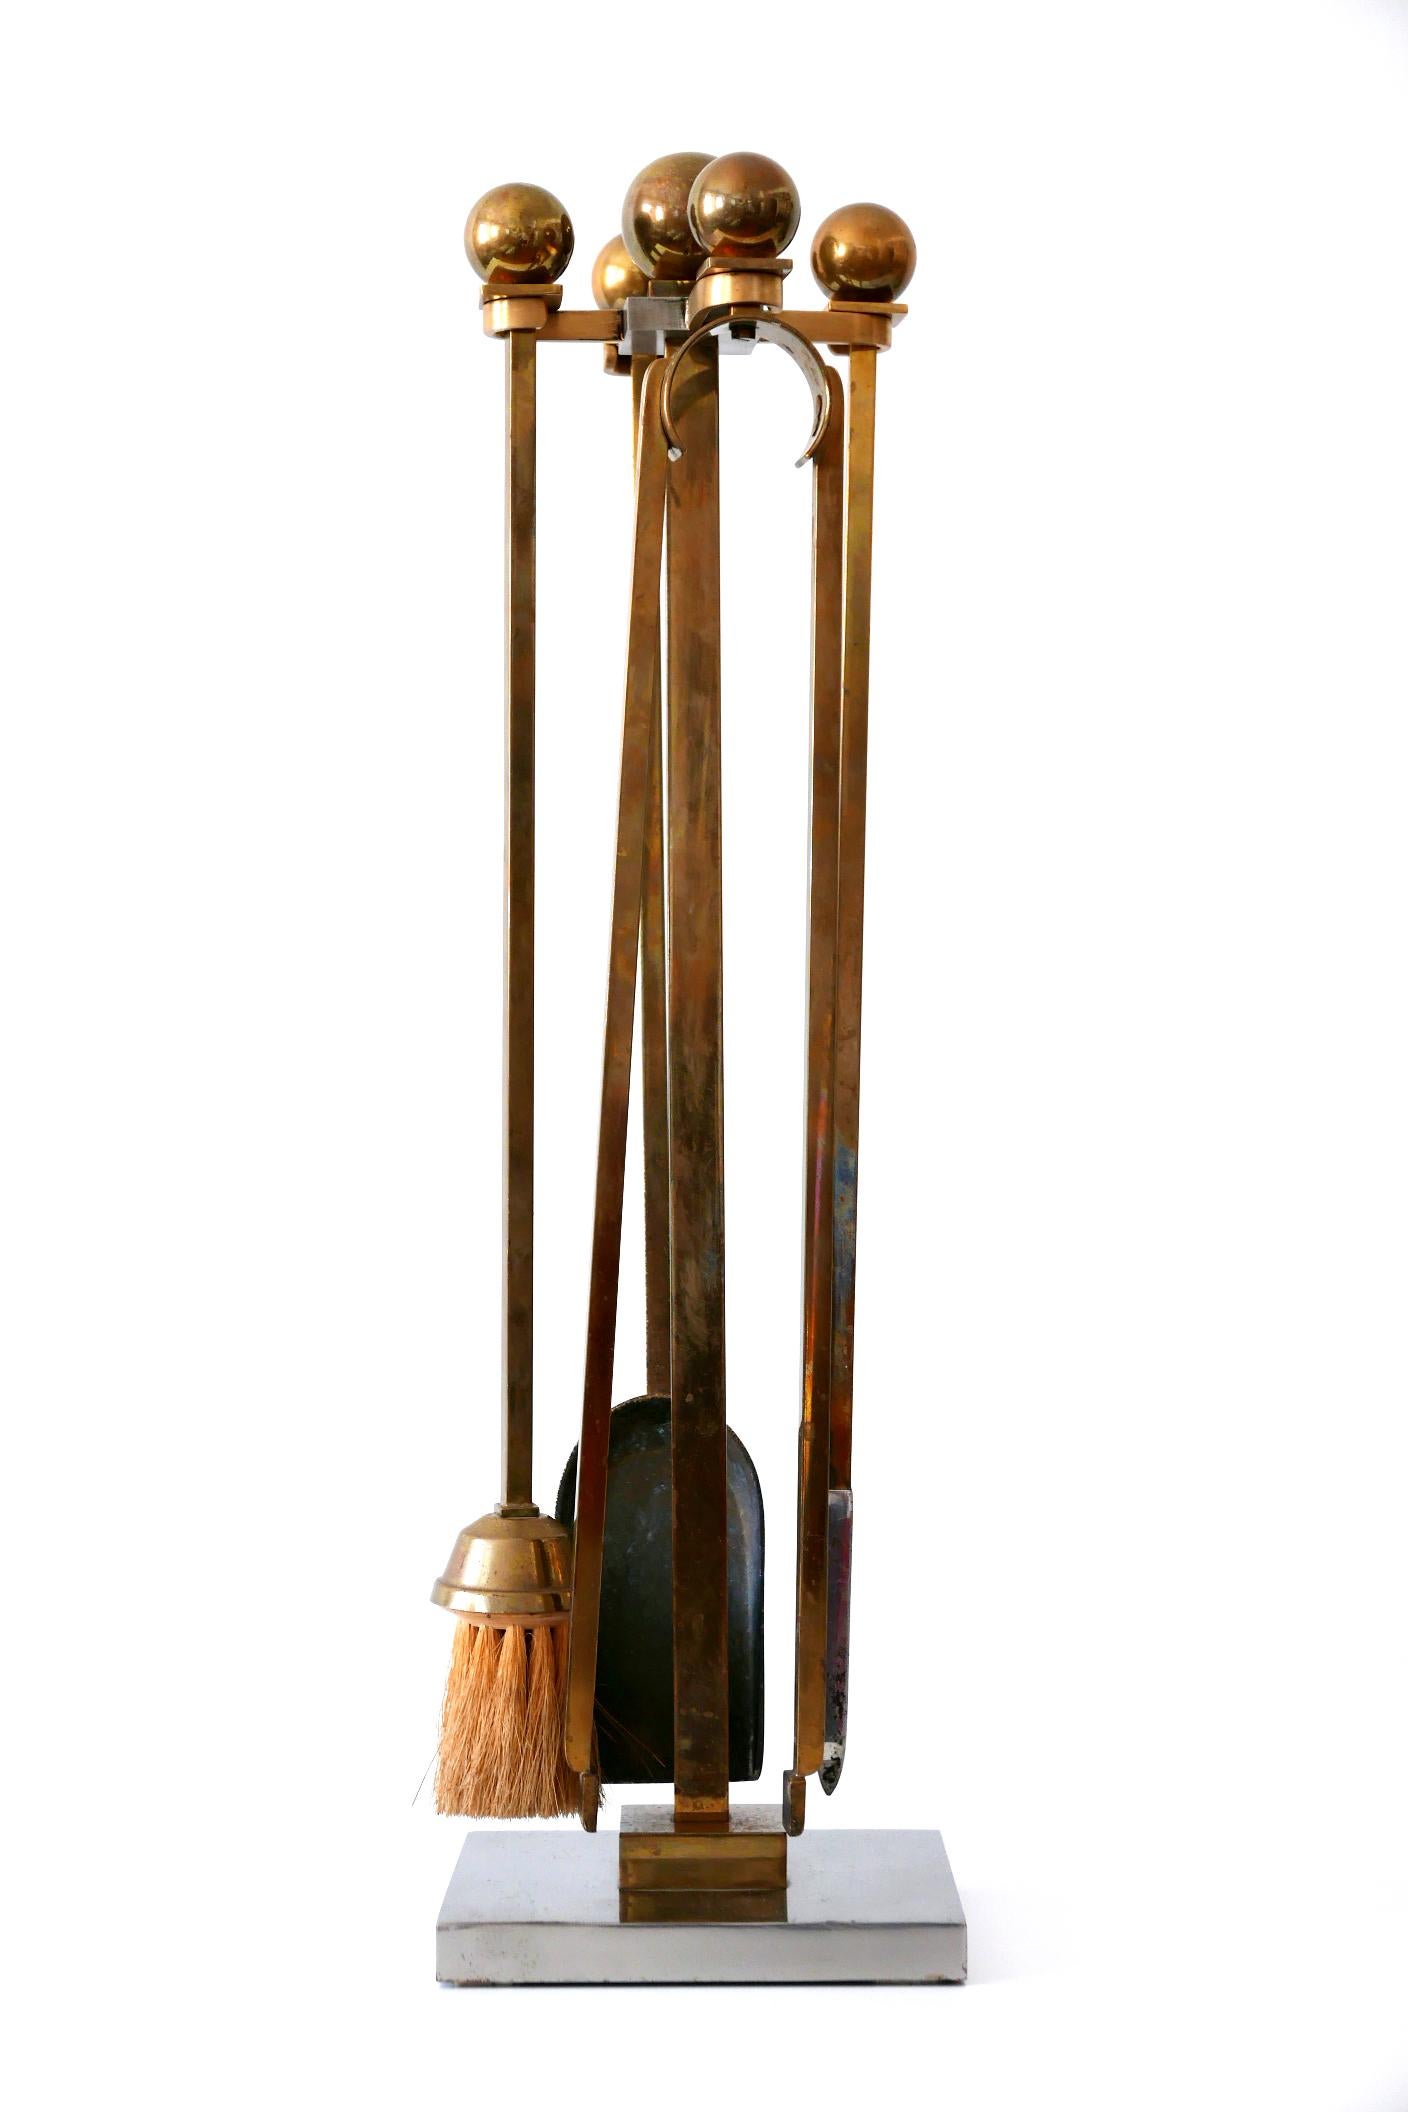 Sculptural Mid-Century Modern fireplace tools. Designed and manufactured probably in 1970s, Germany.

Executed in massive brass and steel.

Dimensions: H 25.59 x W 7.08 x D 7.08 in. / H 65 x W 18 x D 18 cm / Weight 12 Kg.

Good original vintage